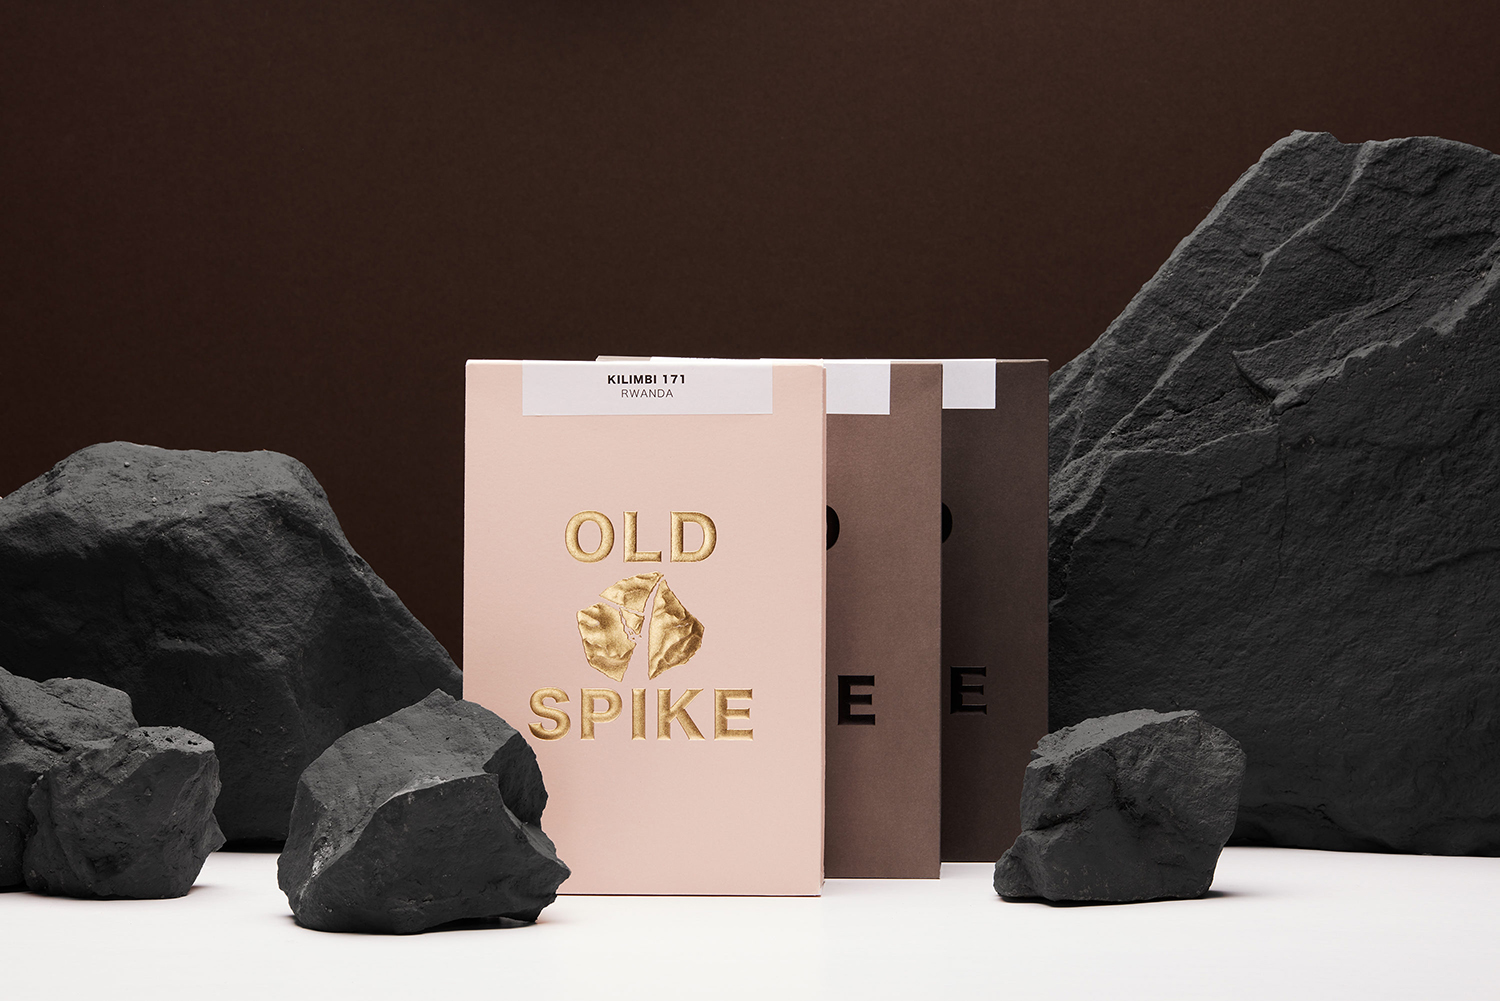 Coffee Branding and Packaging Design – Old Spike Coffee by Commission Studio, United Kingdom